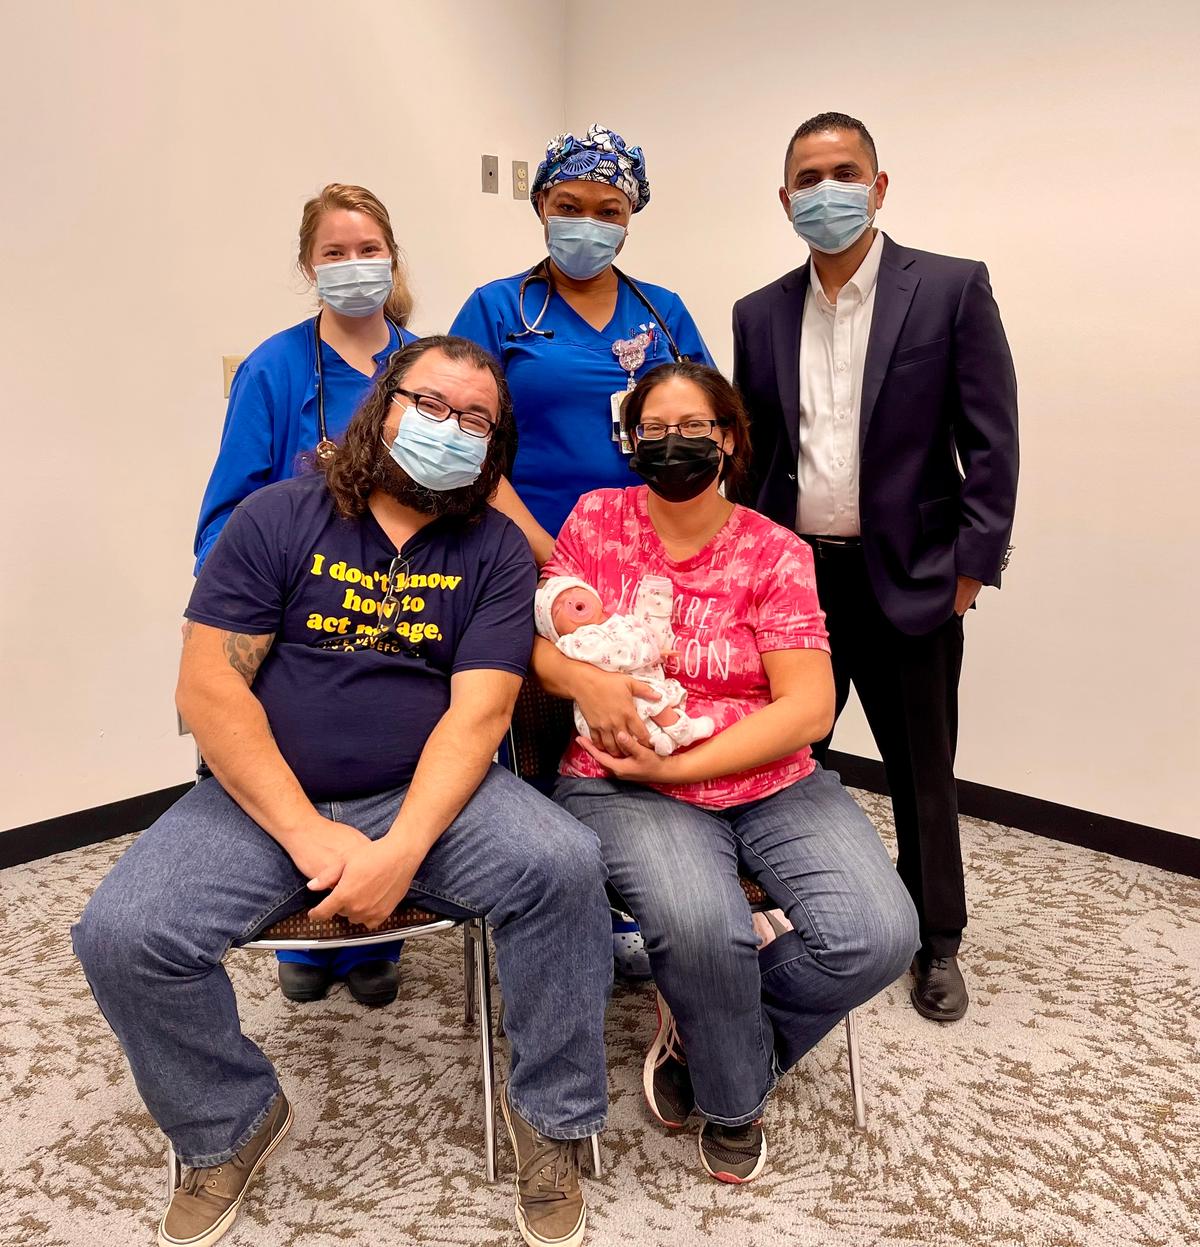 Jonathan and Vanessa with baby Juliette and Riverside Hospital staffers. (Courtesy of <a href="https://riversidecommunityhospital.com/">Riverside Community Hospital</a>)